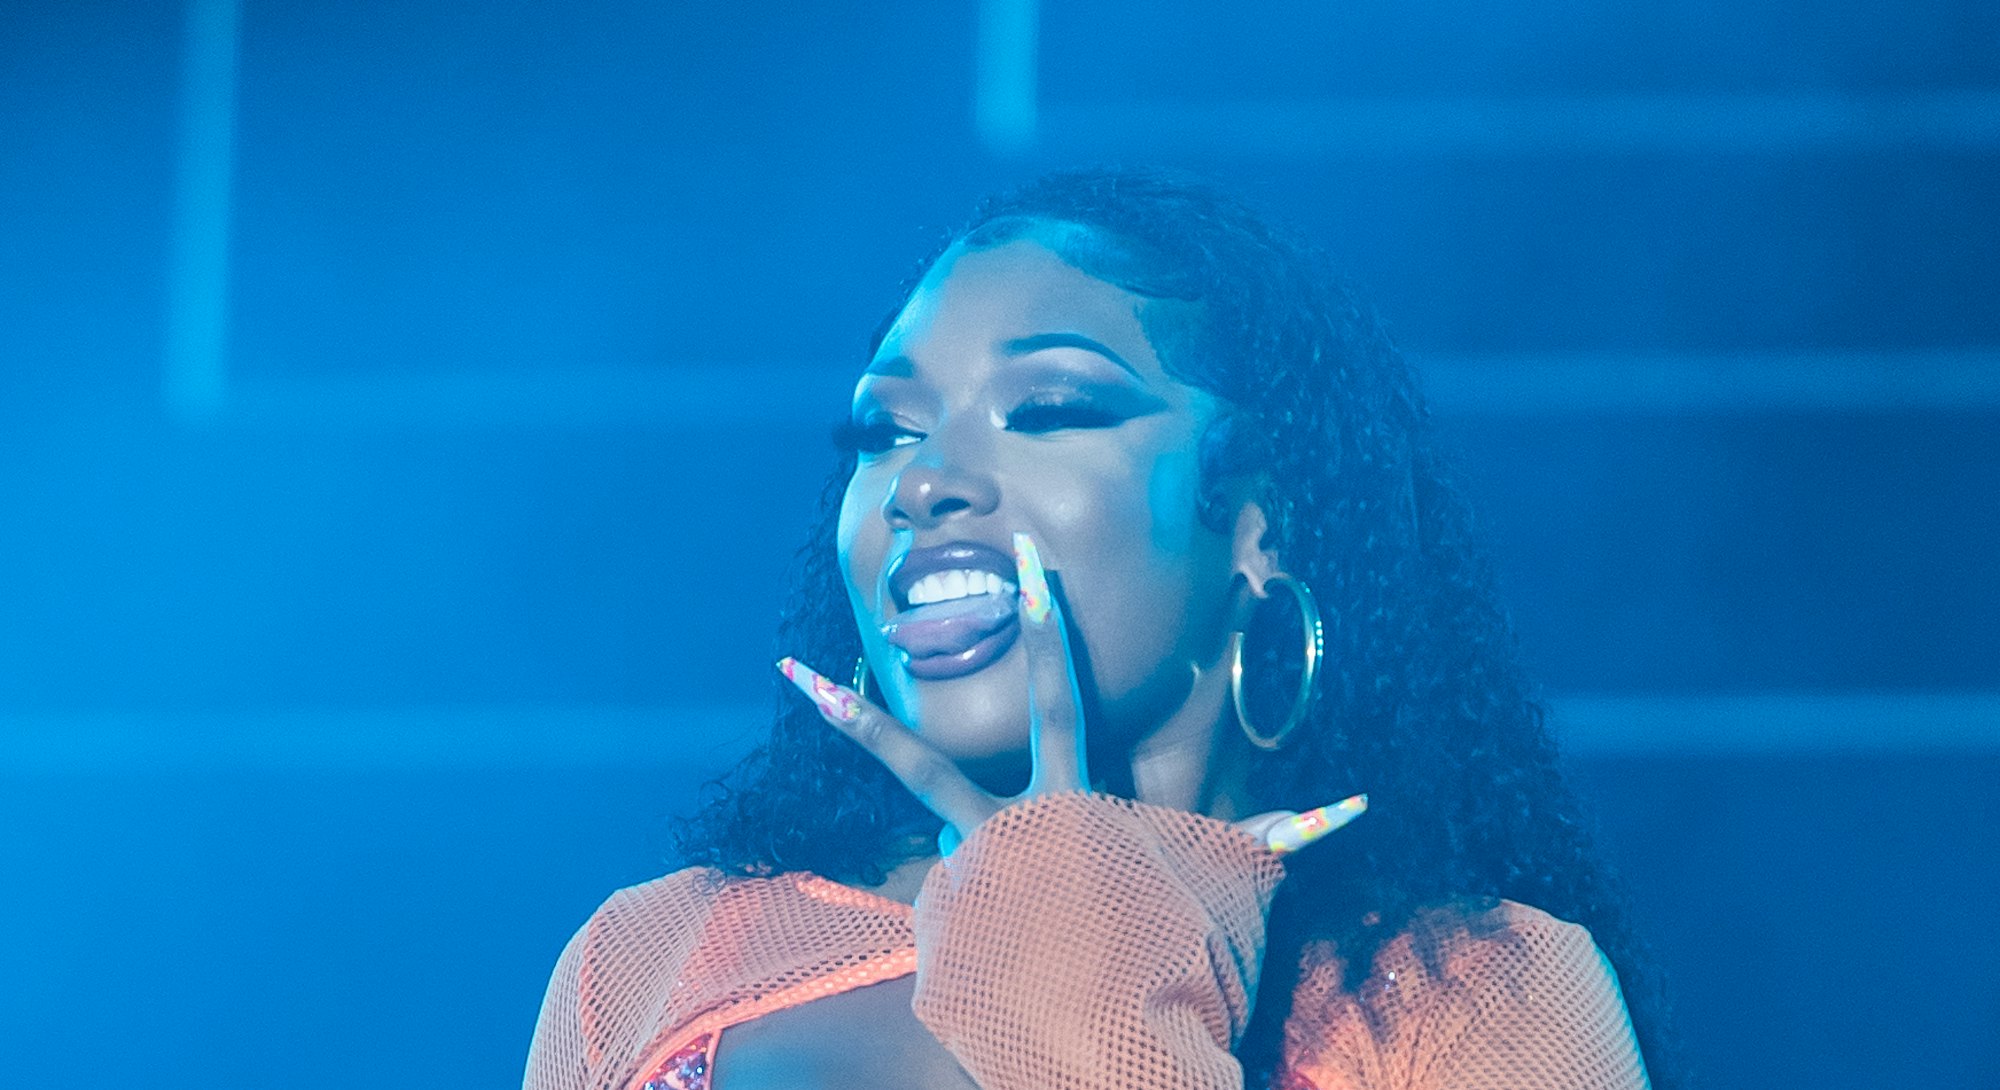 MIAMI GARDENS, FLORIDA - JULY 25: Megan Thee Stallion performs onstage during day 3 at Rolling Loud ...